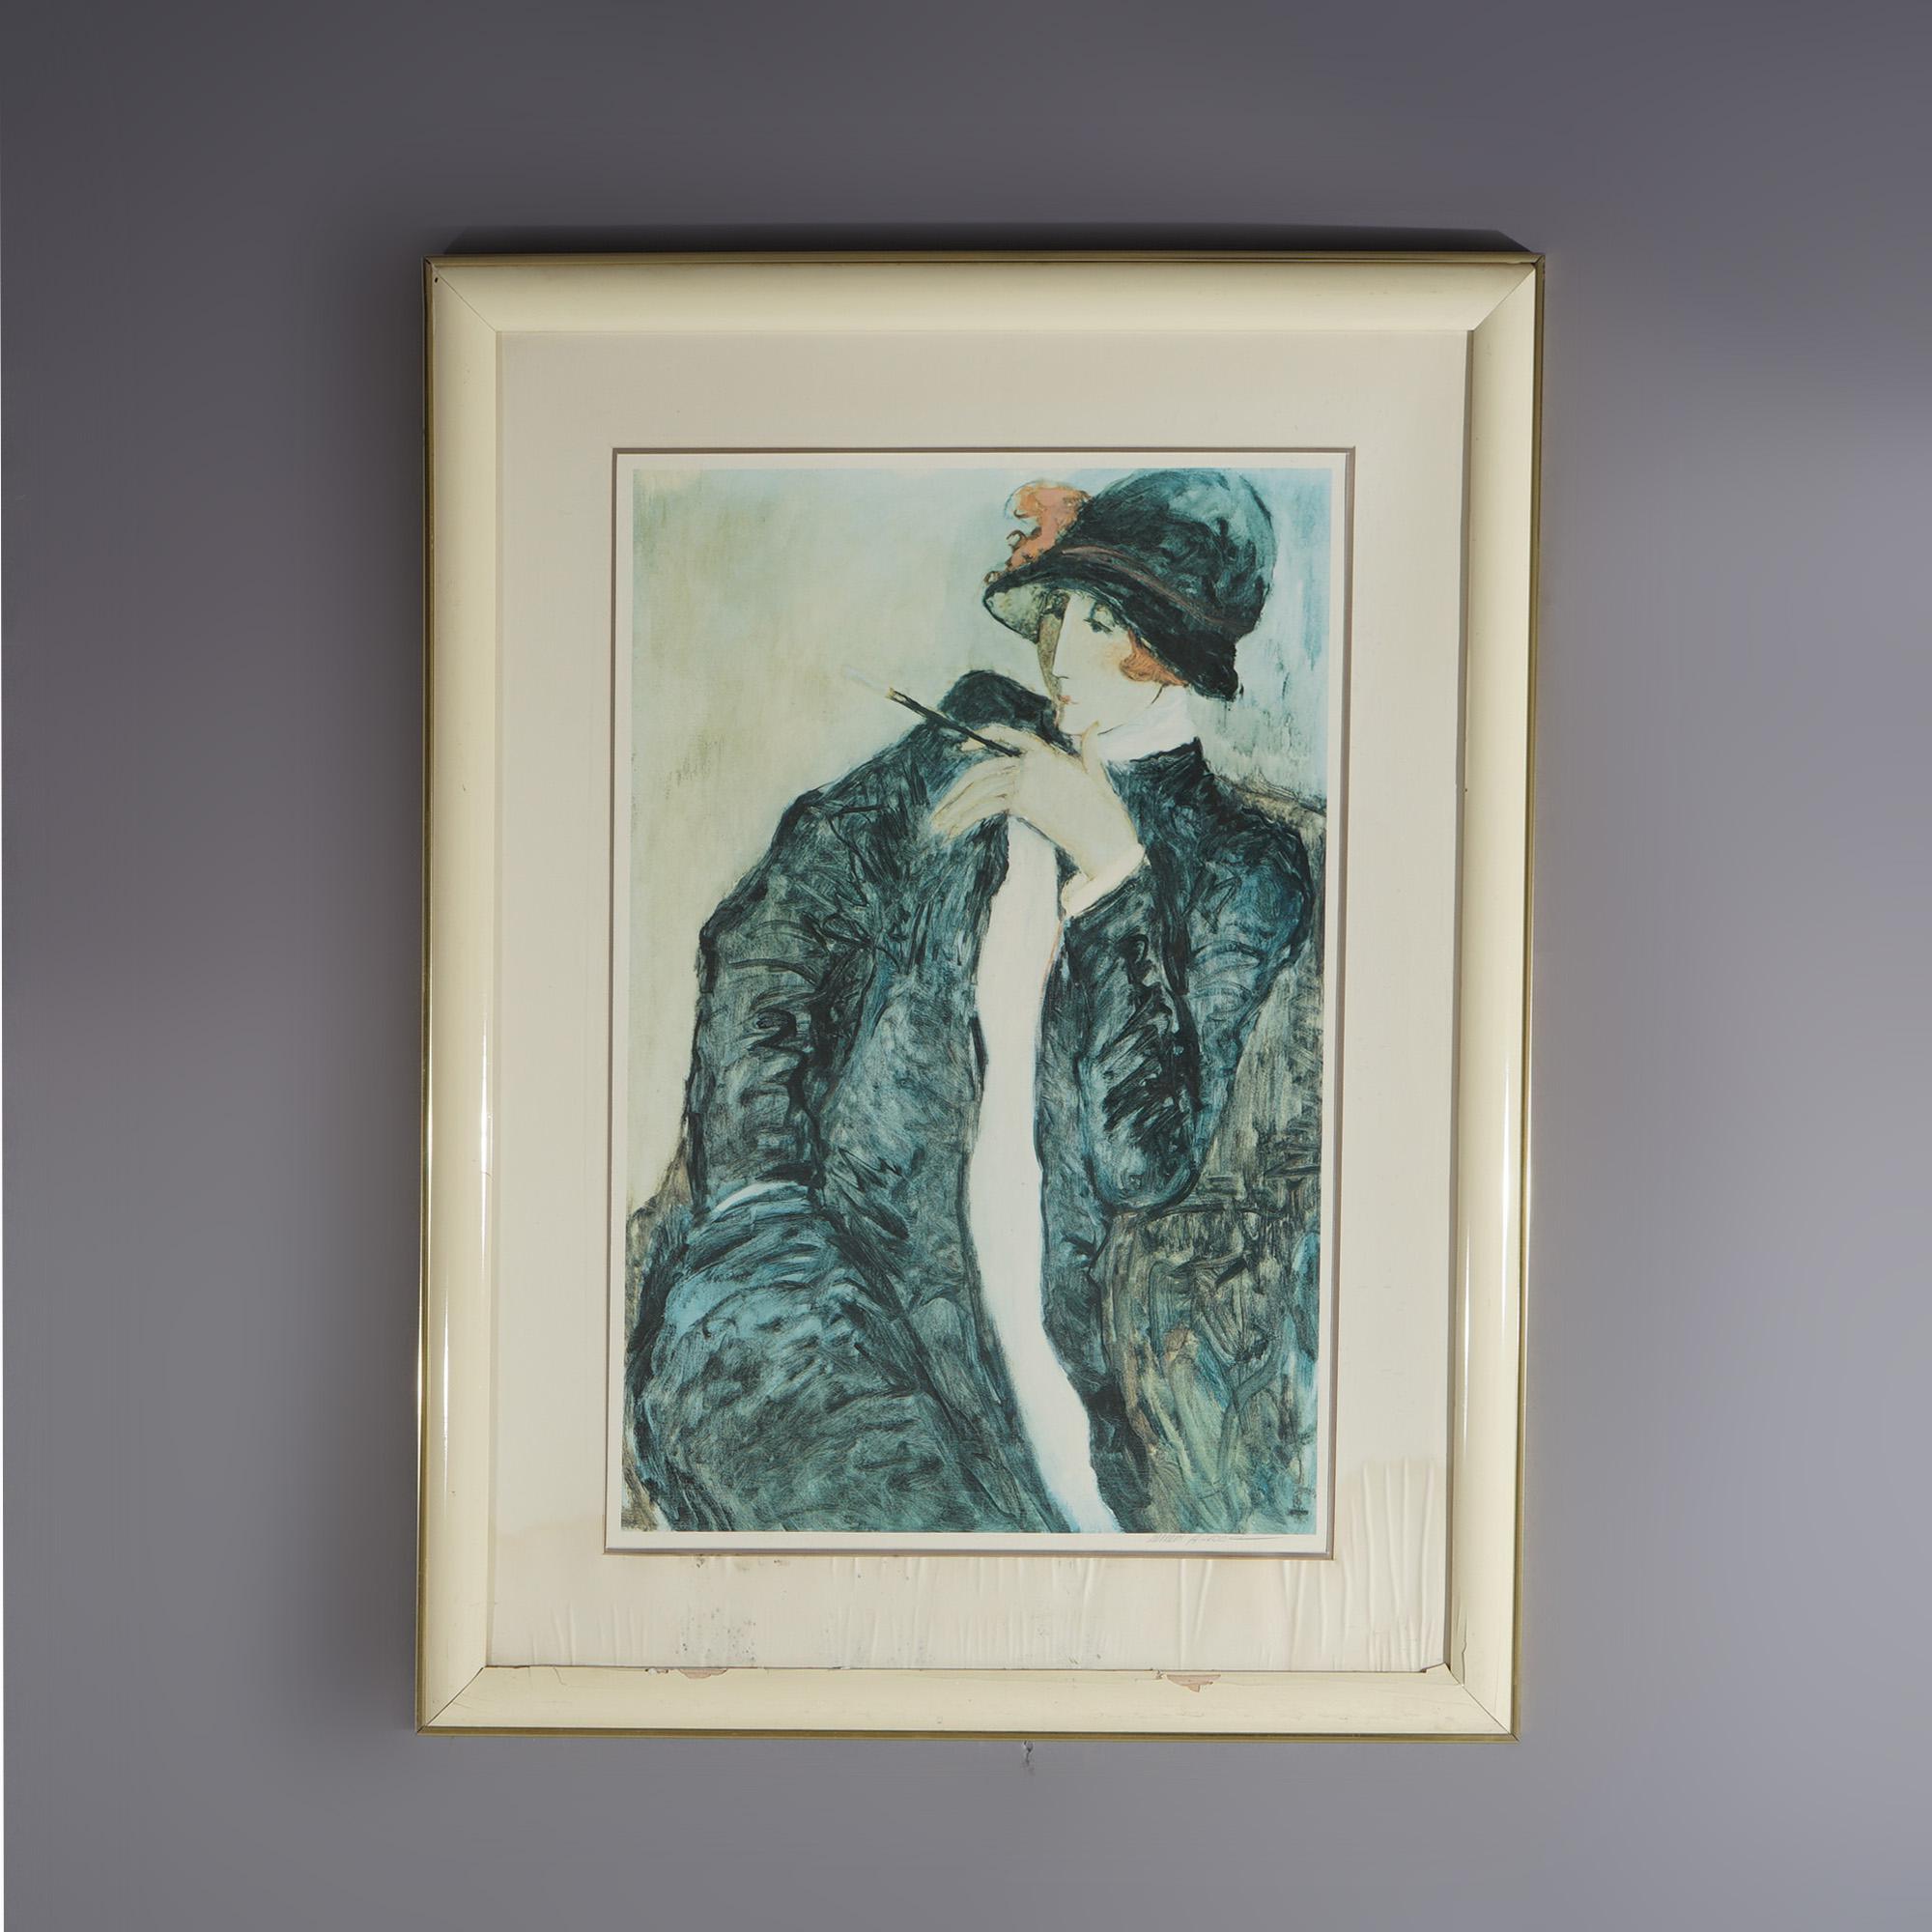 A vintage Art Deco style lithograph depicts a woman in a hat, signed Barbara Wood, 20th C

Measures - 41.5